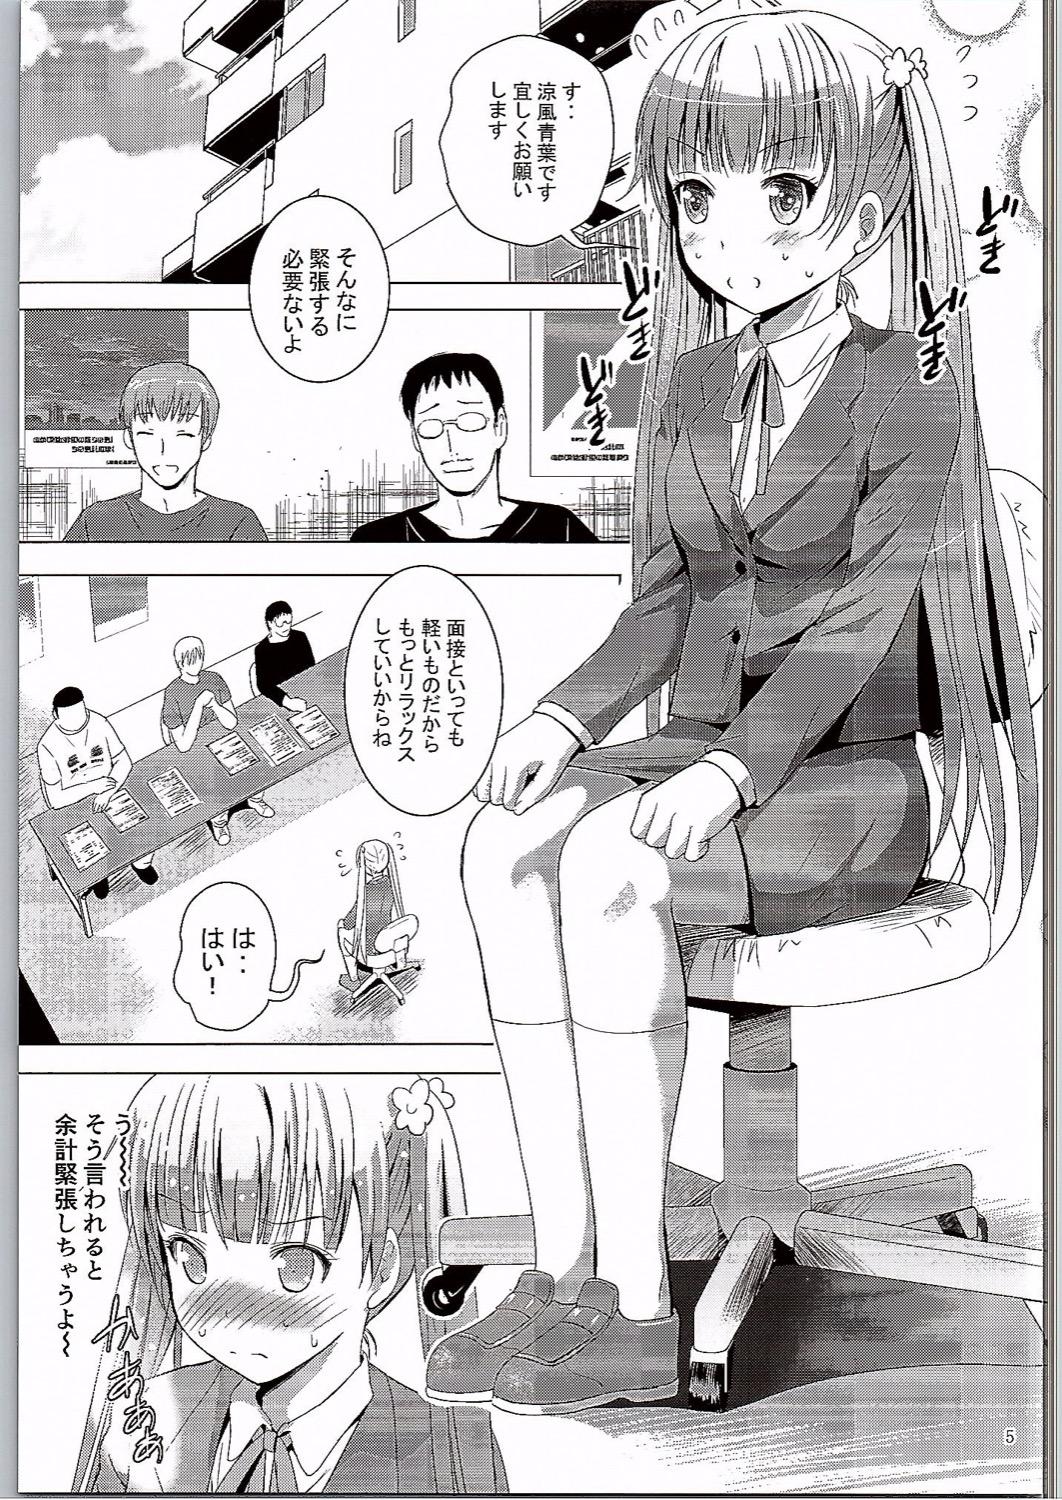 Dancing MOUSOU Mini Theater 38 - New game Buttfucking - Page 4